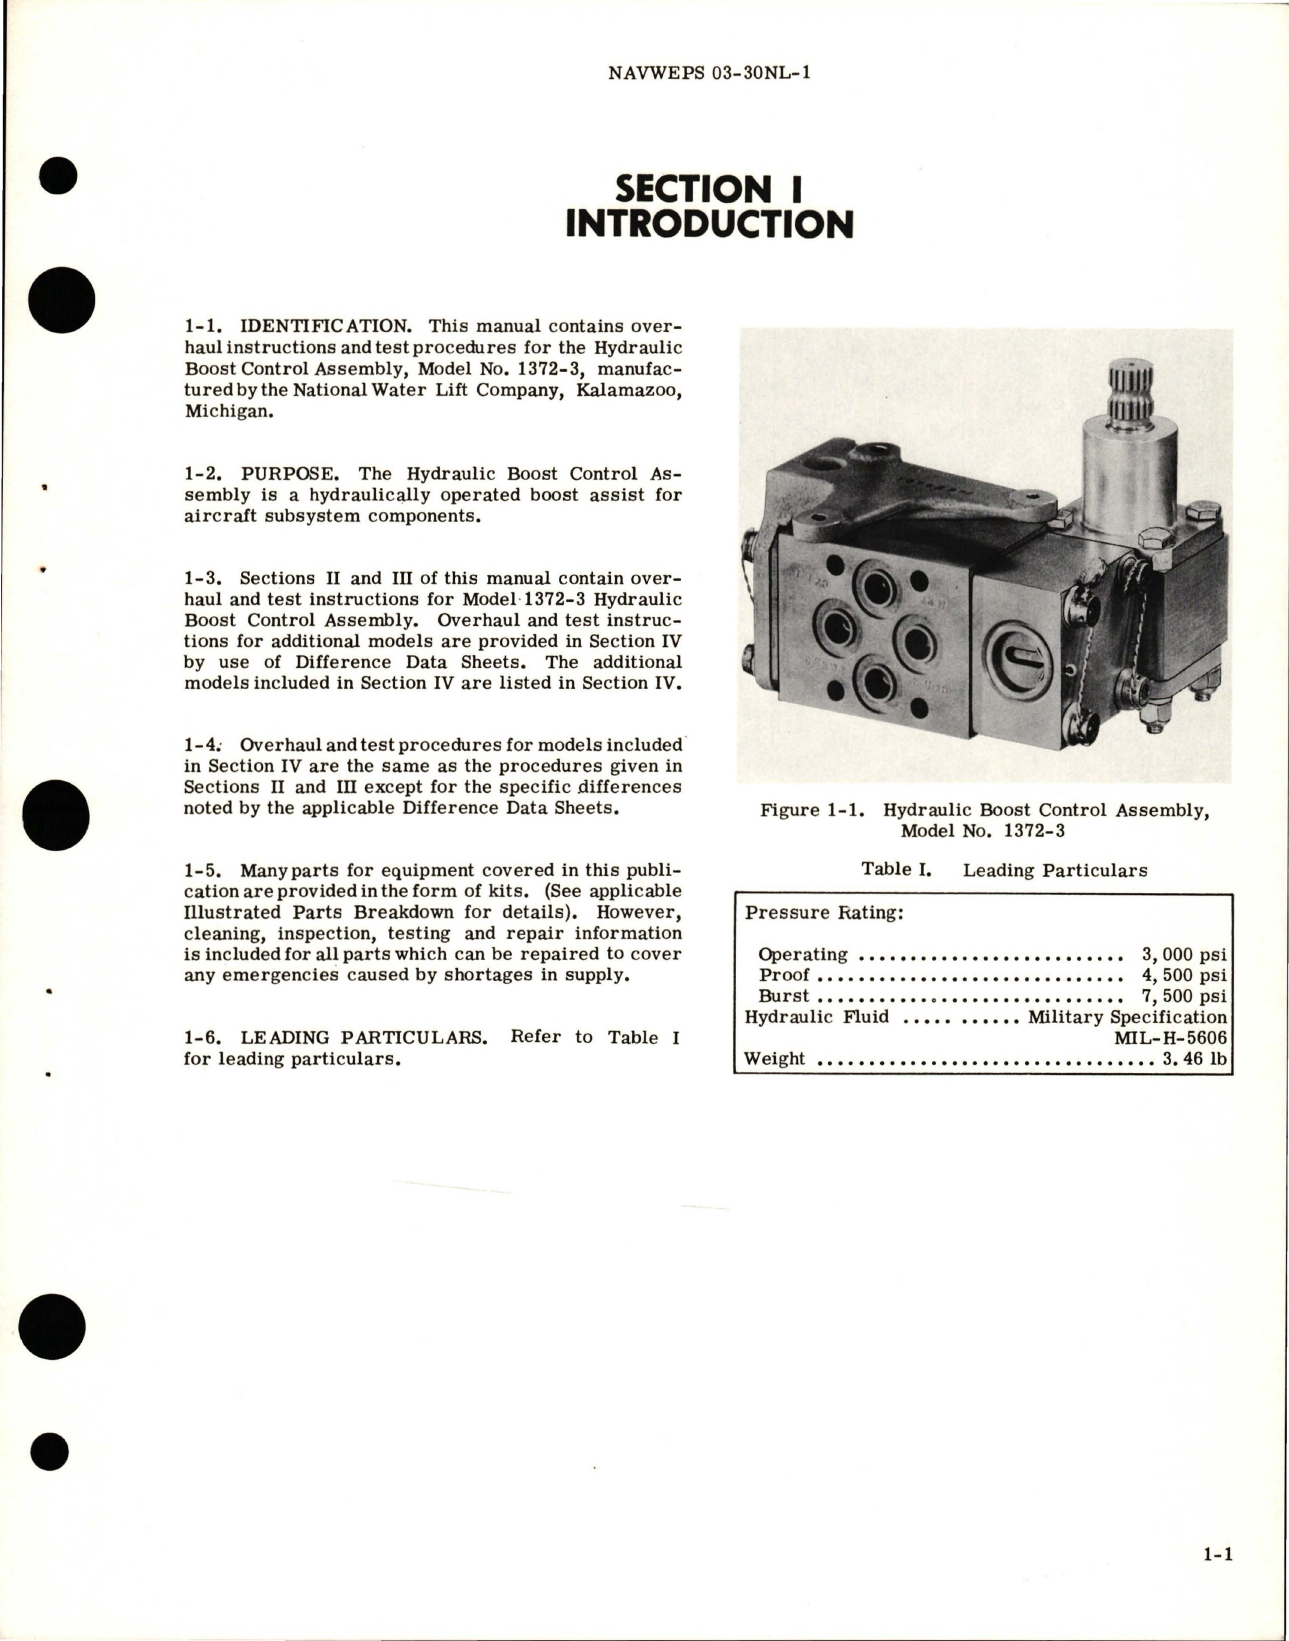 Sample page 5 from AirCorps Library document: Overhaul Instructions for Hydraulic Boost Control Assembly - Parts 137200-3, 137200-4, and 137200-5